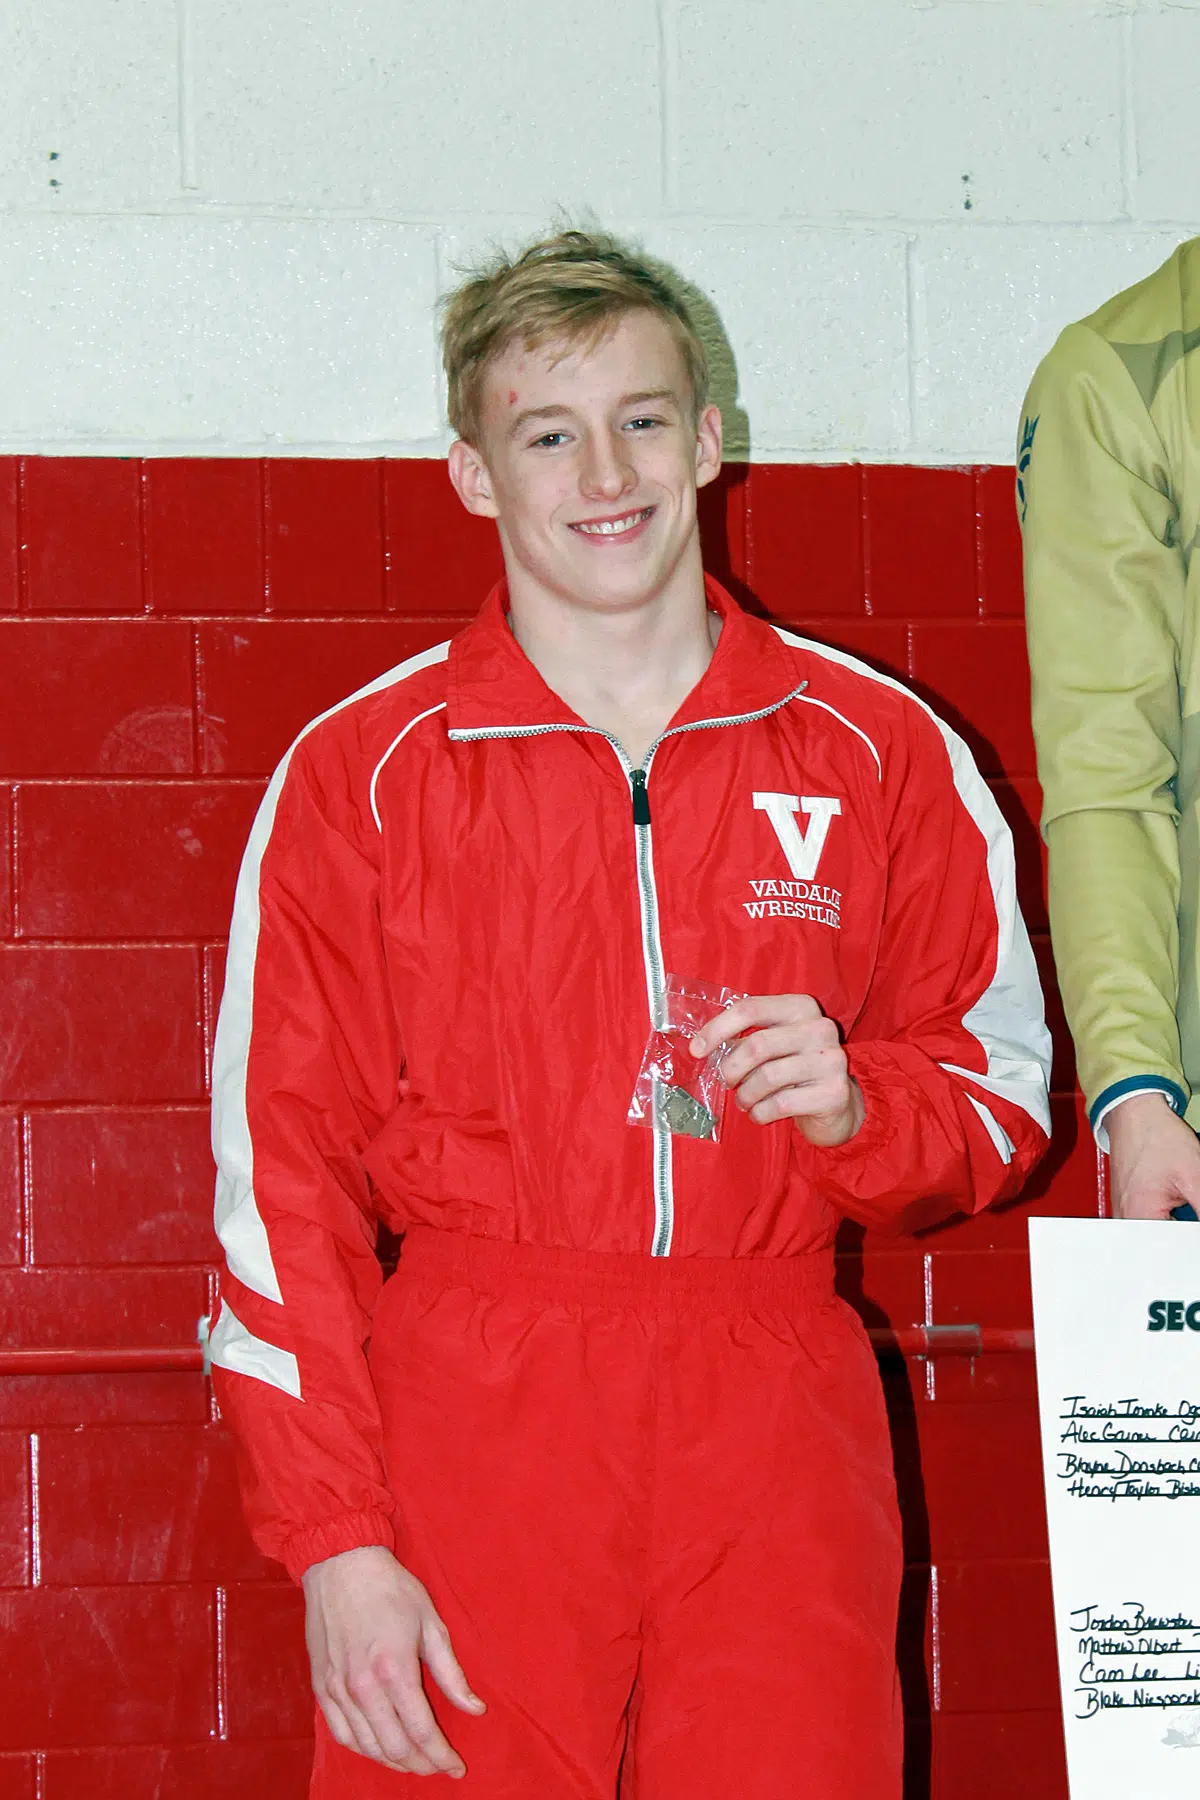 Tanner Swain Takes 2nd Place at Individual Wrestling Sectional, Qualifies for State Tournament